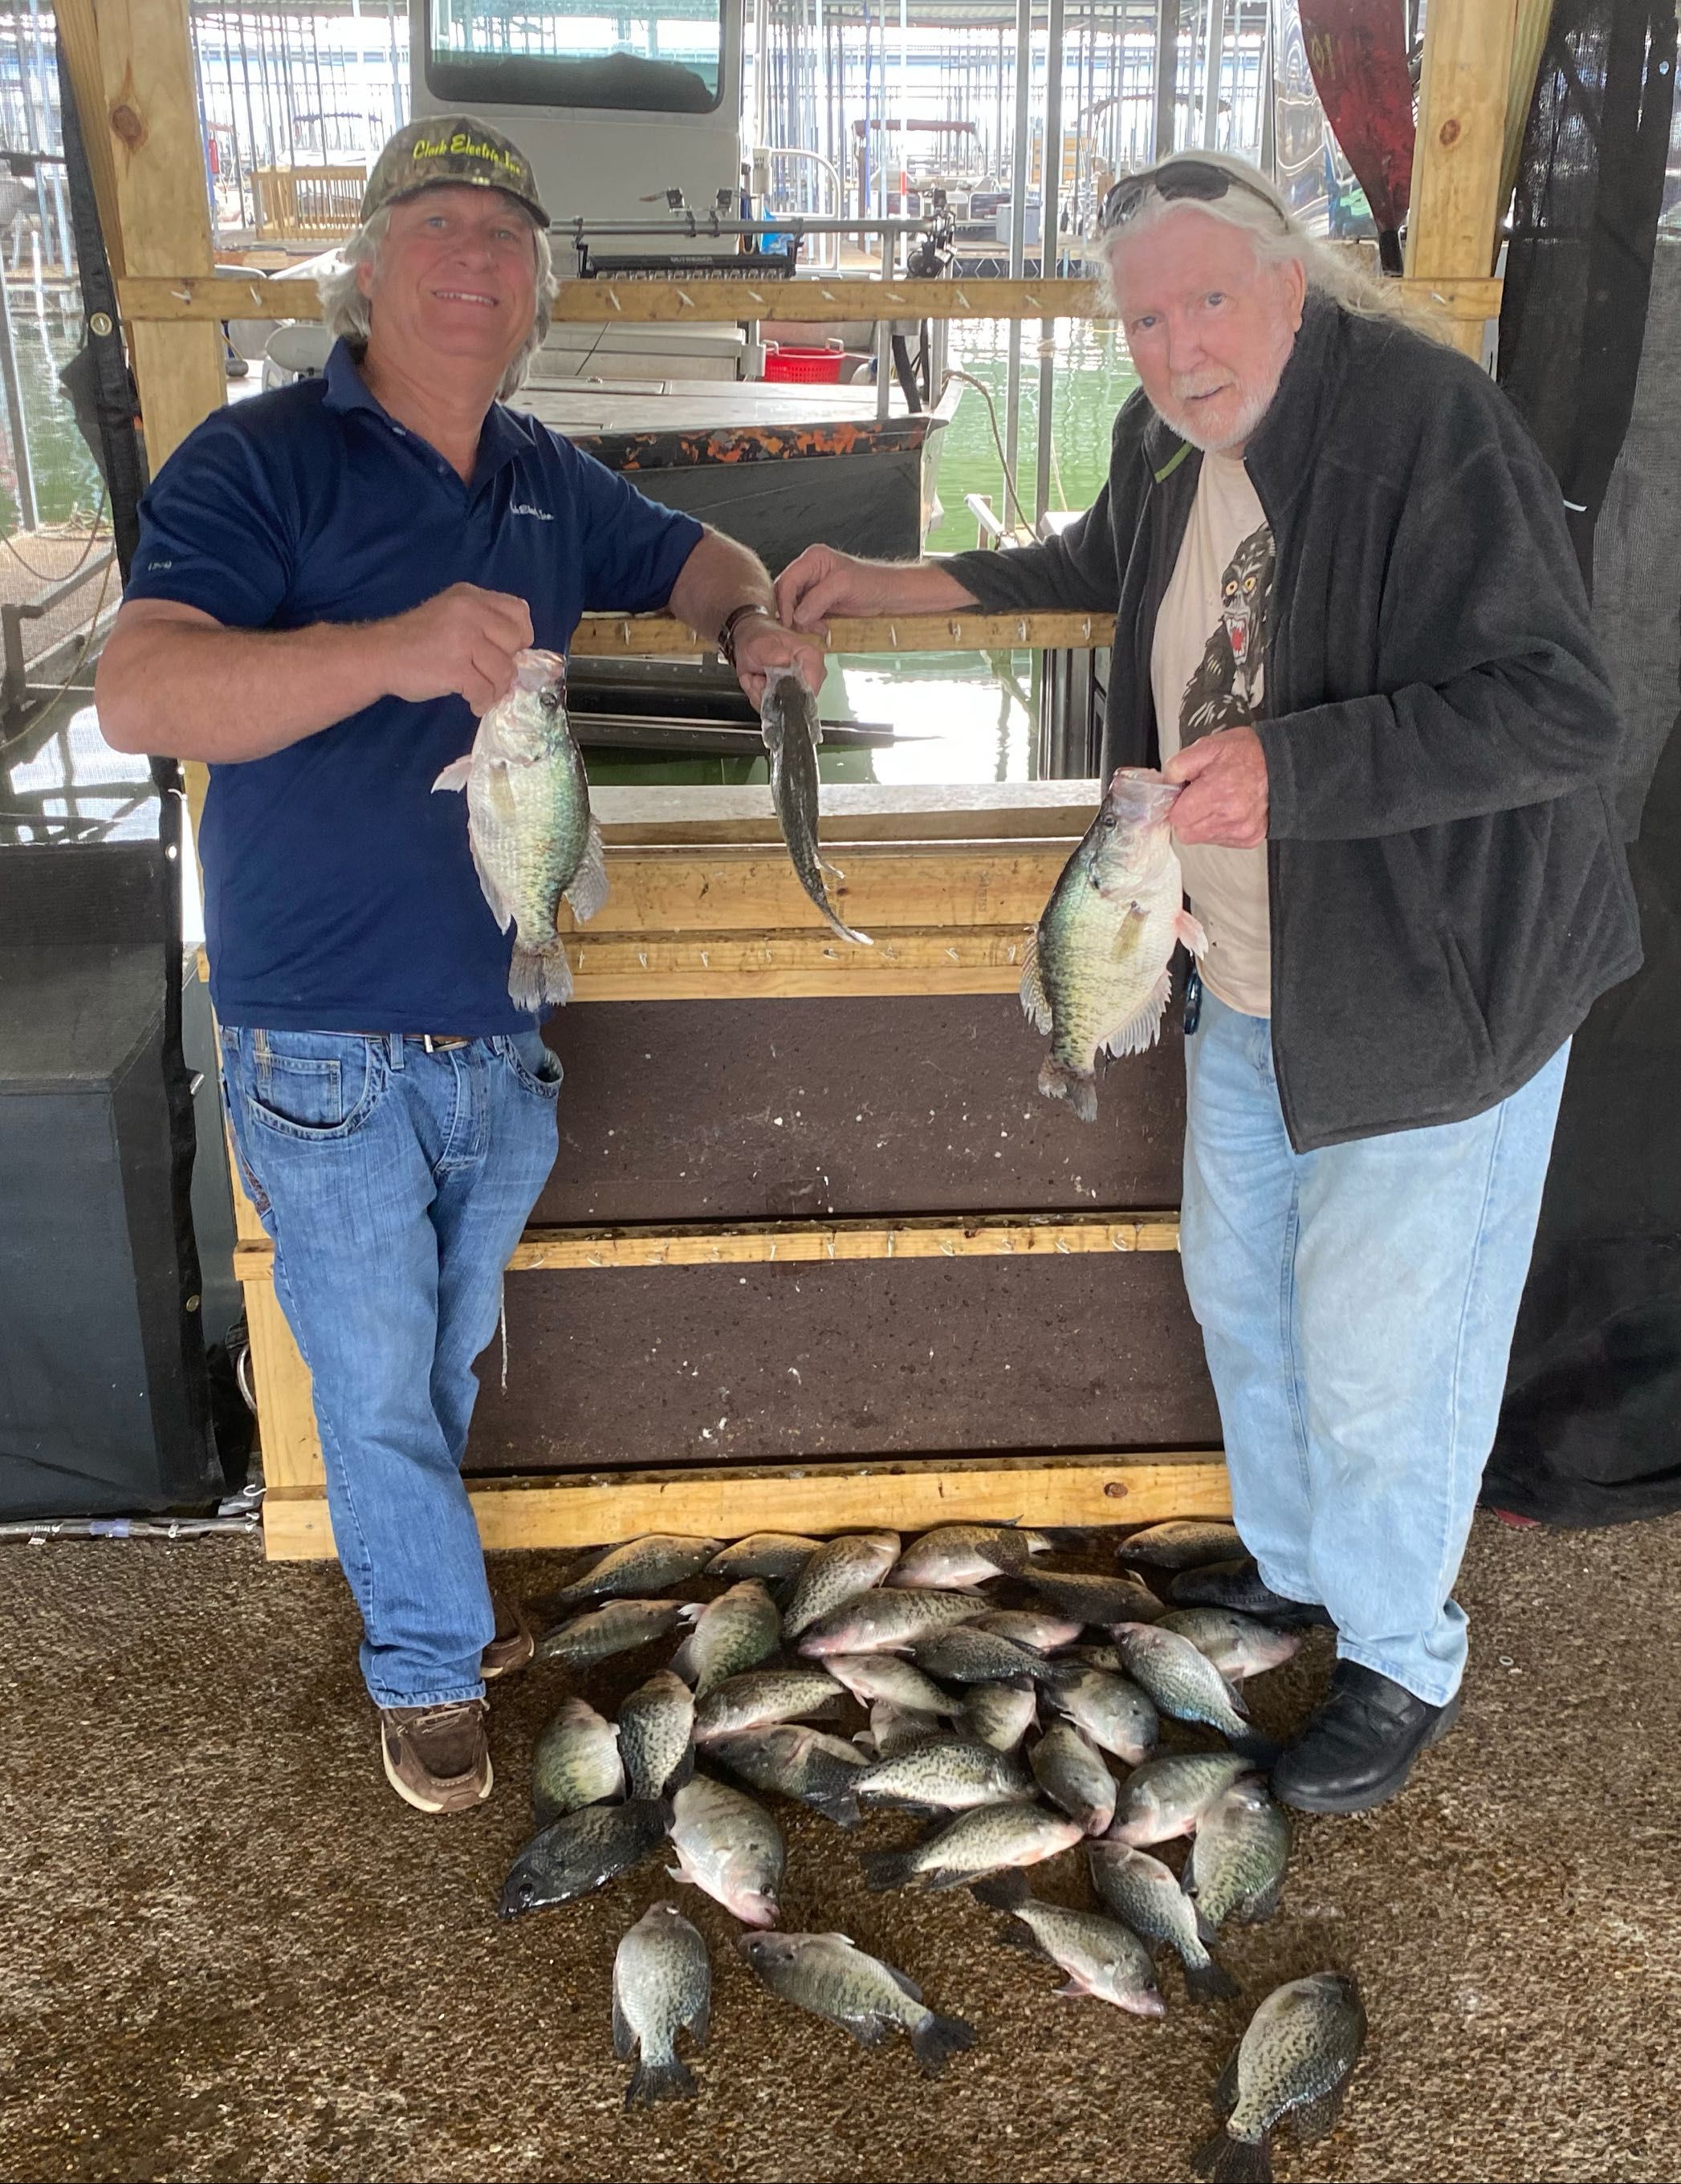 weekday at the office- crappie fishing!